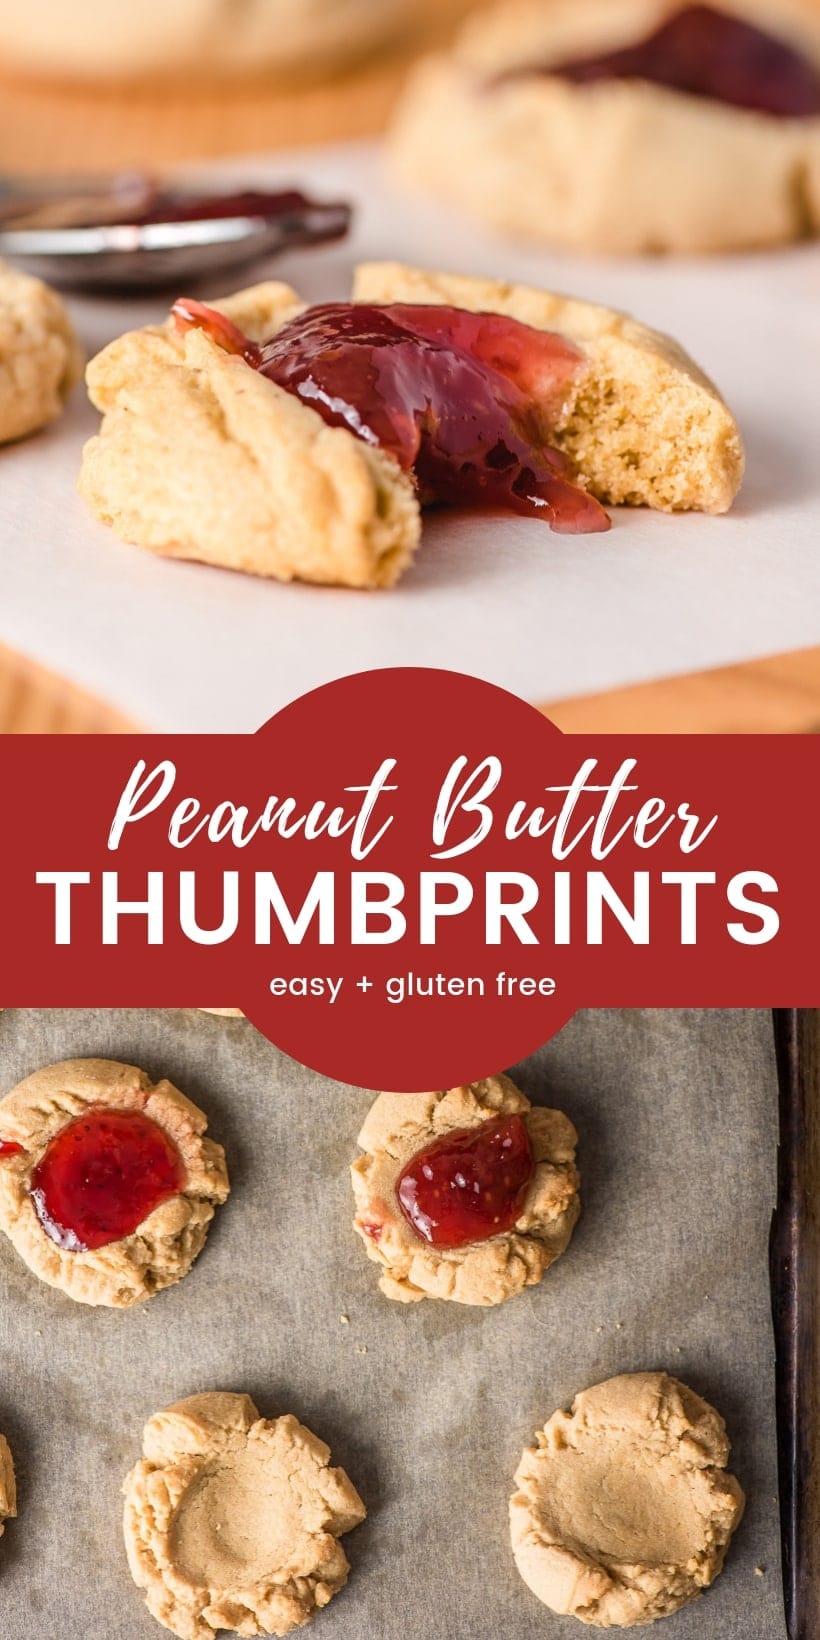 Peanut Butter Thumbprint Cookies with jam in the center